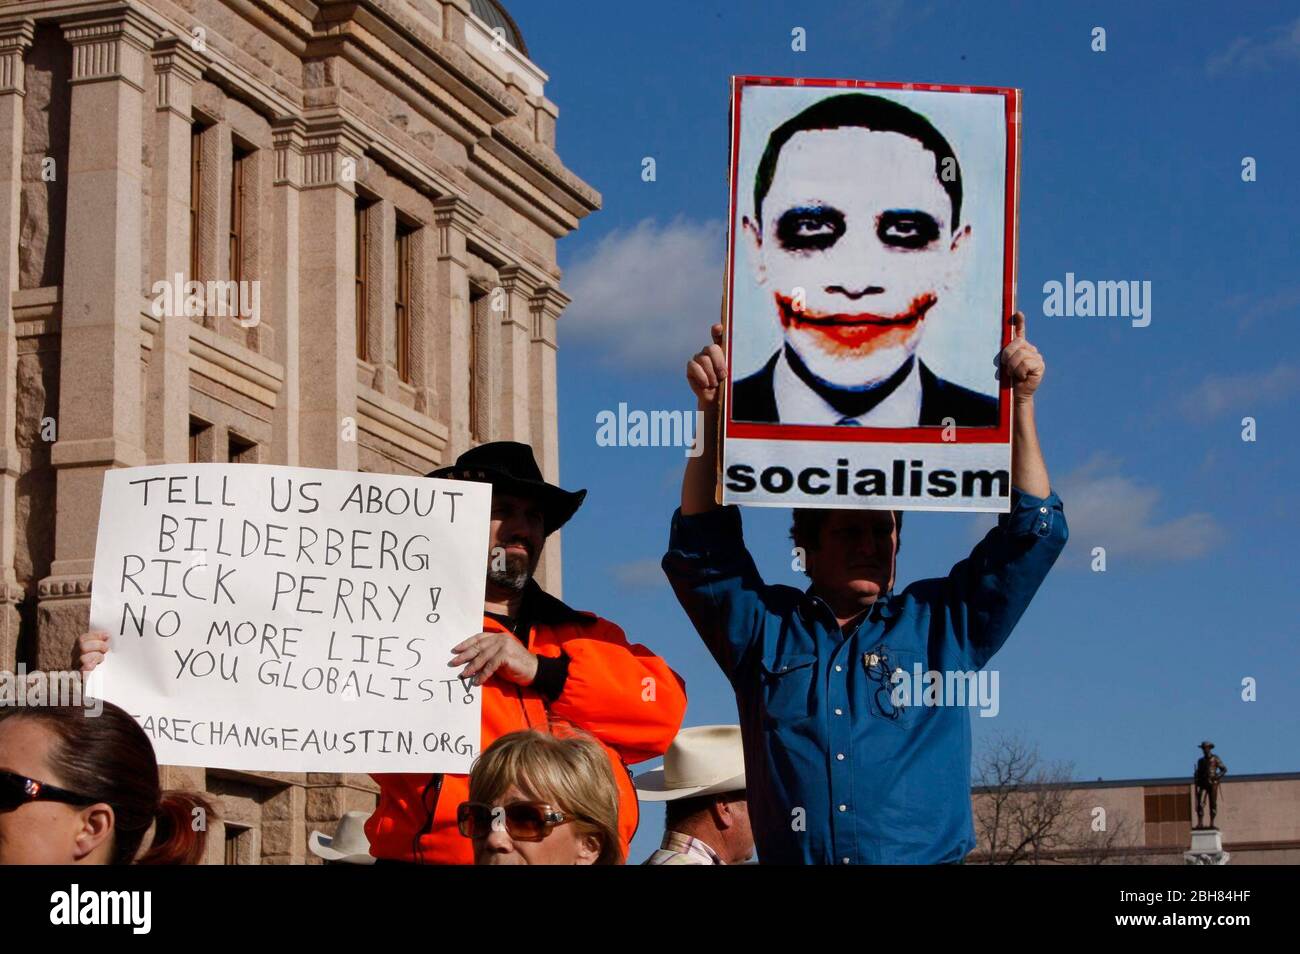 Austin Texas USA, January 16, 2009: A coalition of Tea Party groups advocating diverse causes rally against Democrats and U.S. President Barack Obama at the Texas Capitol. The event comes a week after the cancellation of a February Tea Party conference in San Antonio that was to feature Sarah Palin as speaker. ©Bob Daemmrich Stock Photo